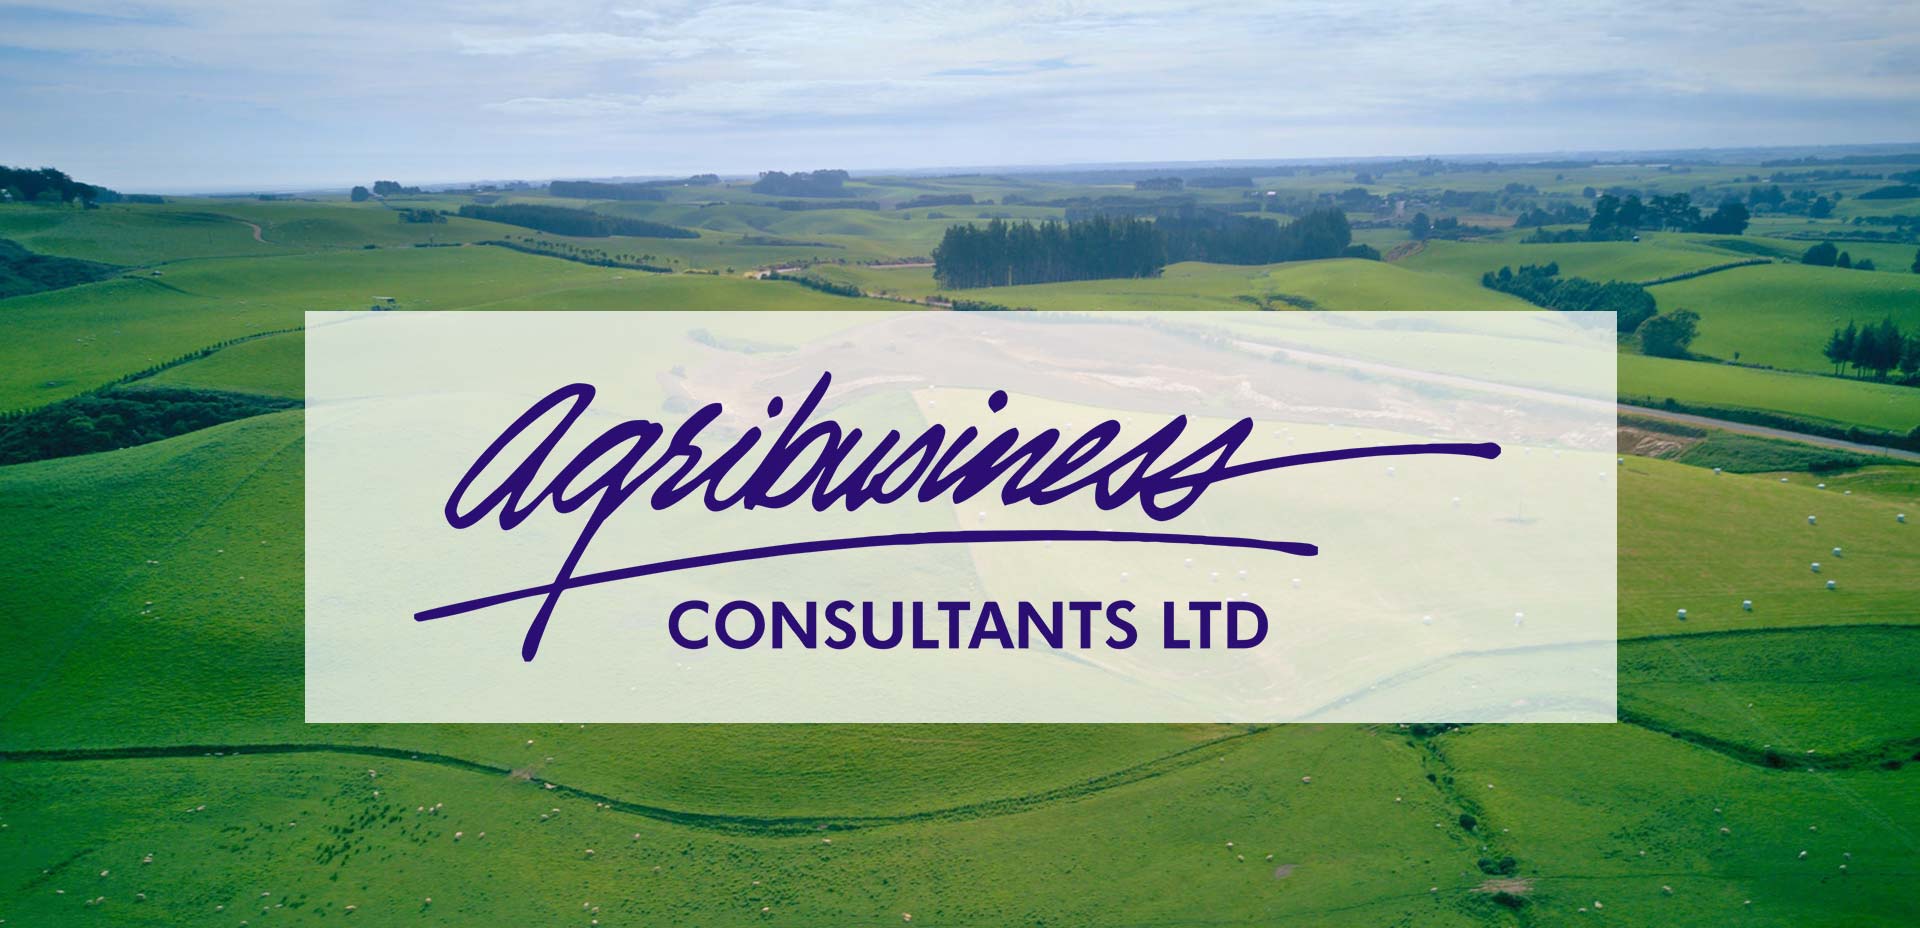 Welcome To Agribusiness Consultants Ltd